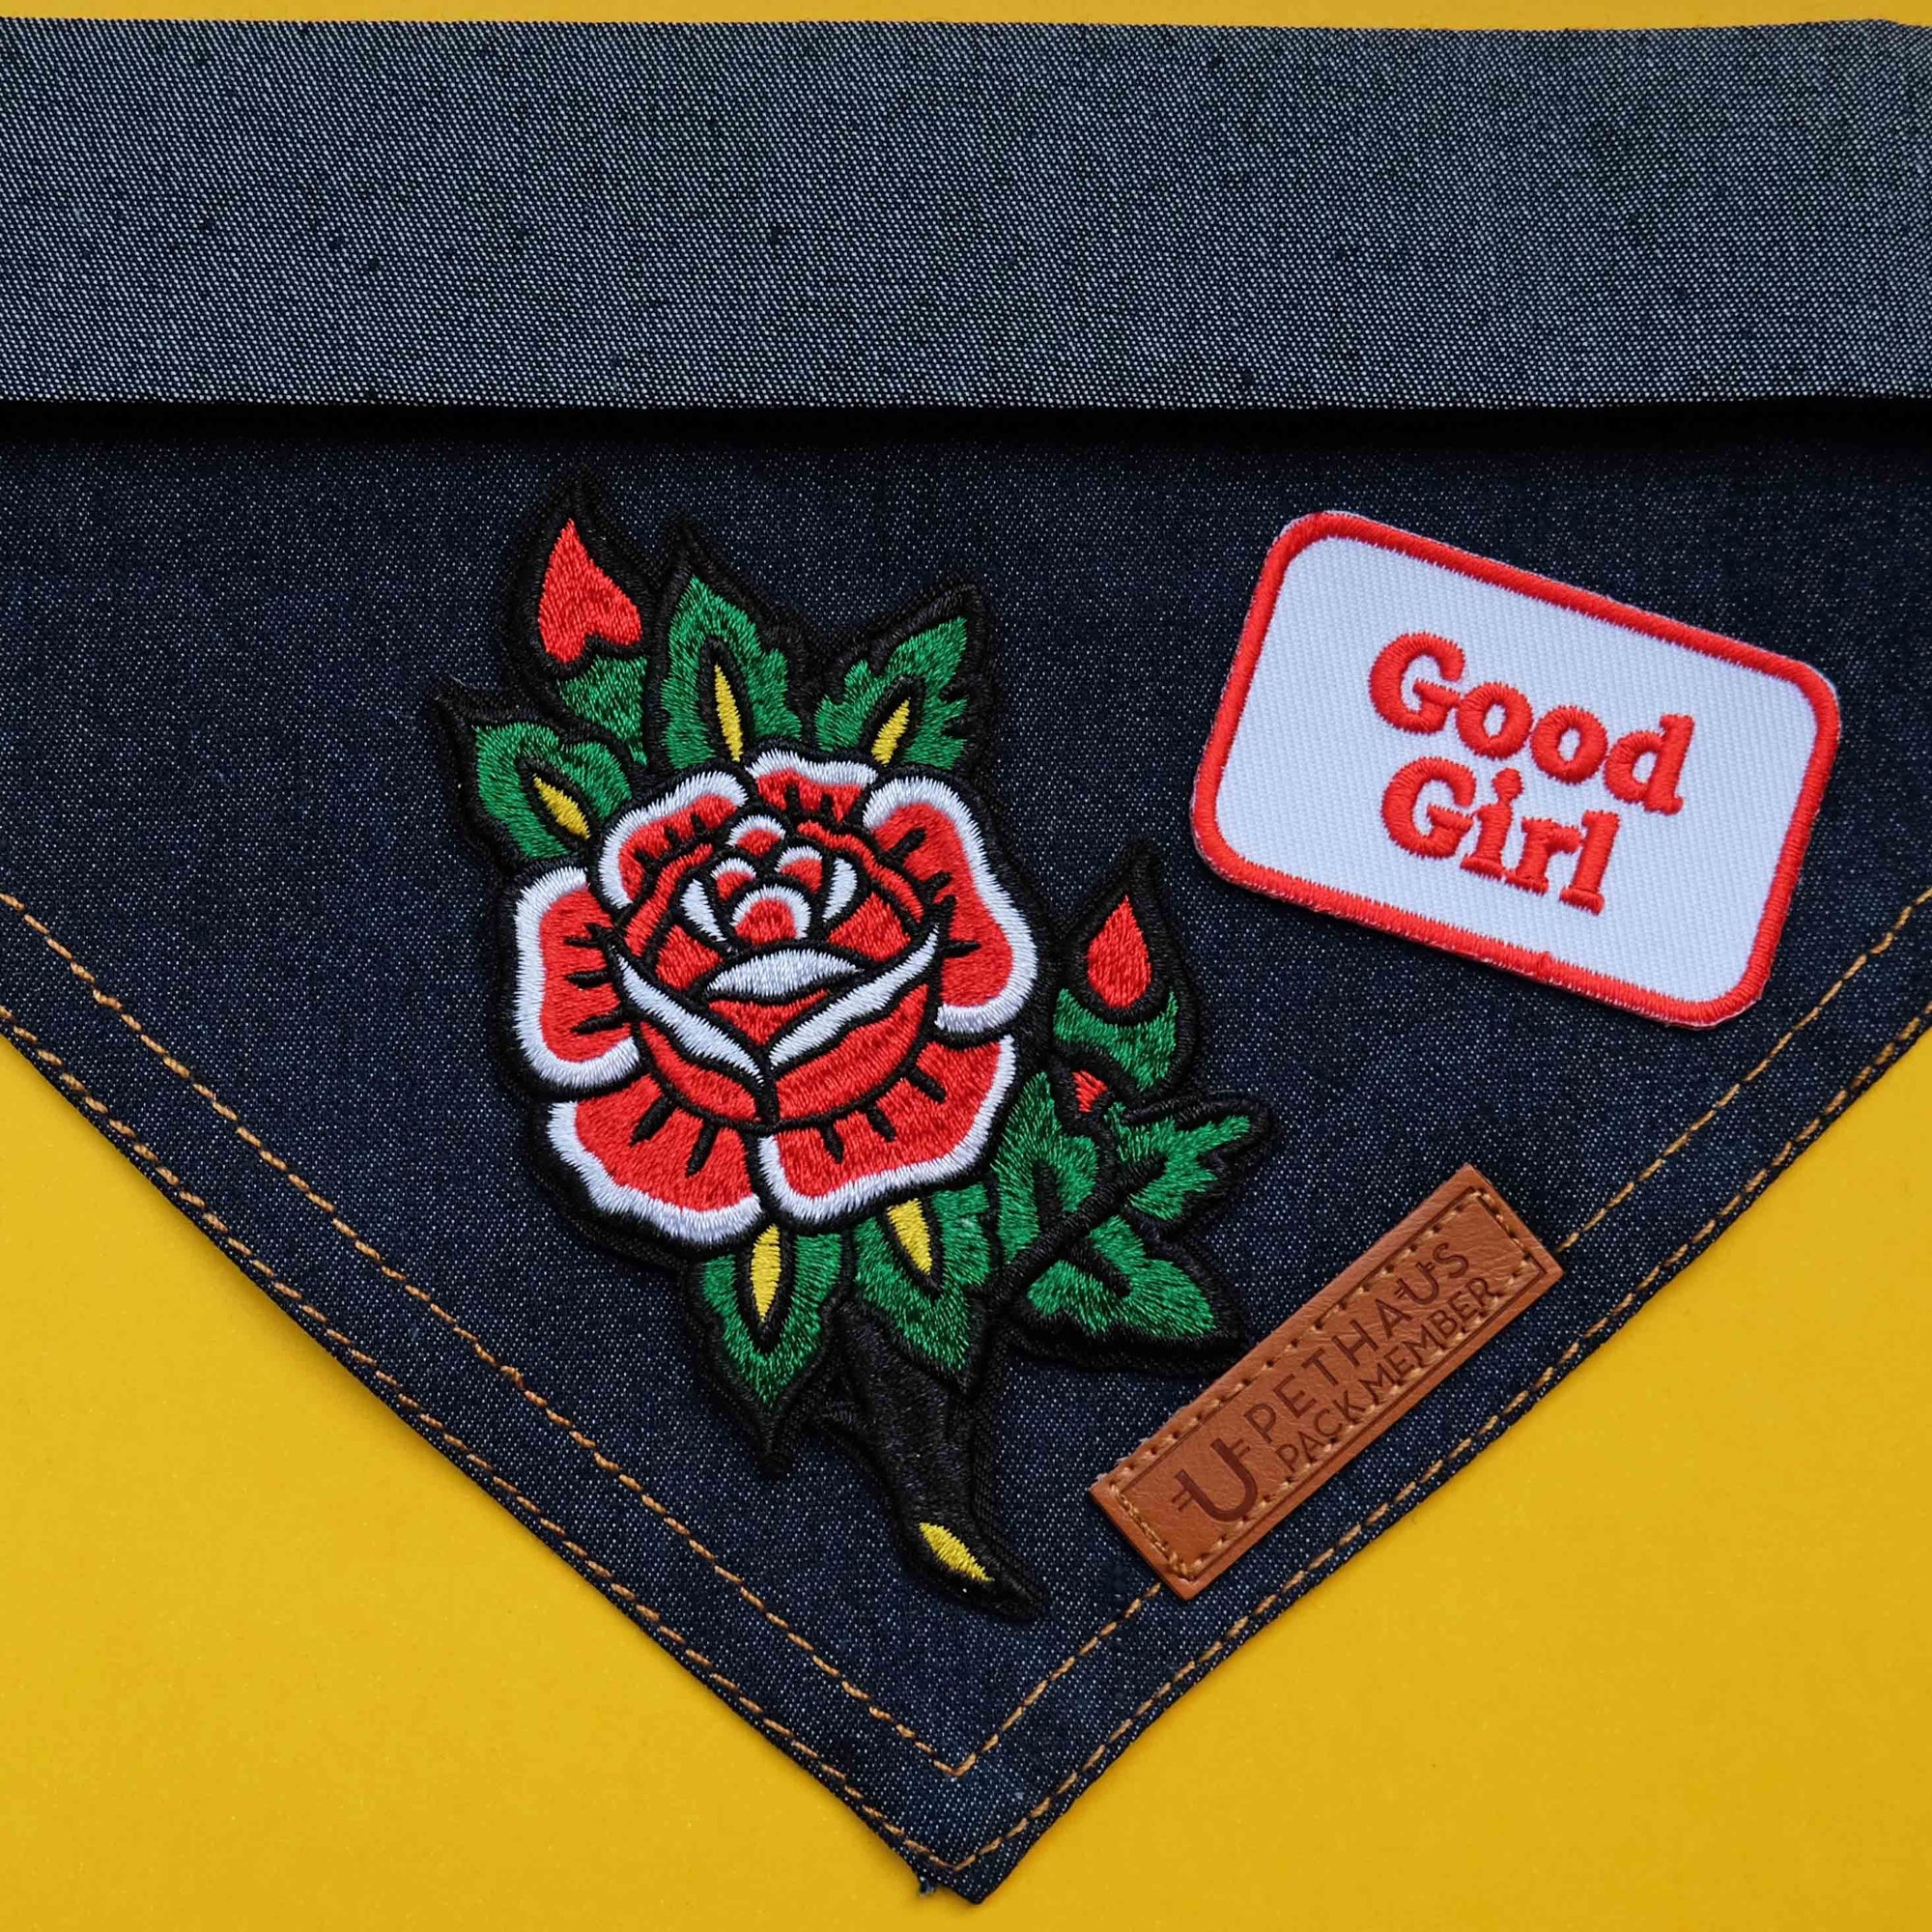 Rose patch, tattoo rose, embroidered rose patch, rockabilly patch, patch for dog, pethaus, BLC Patches